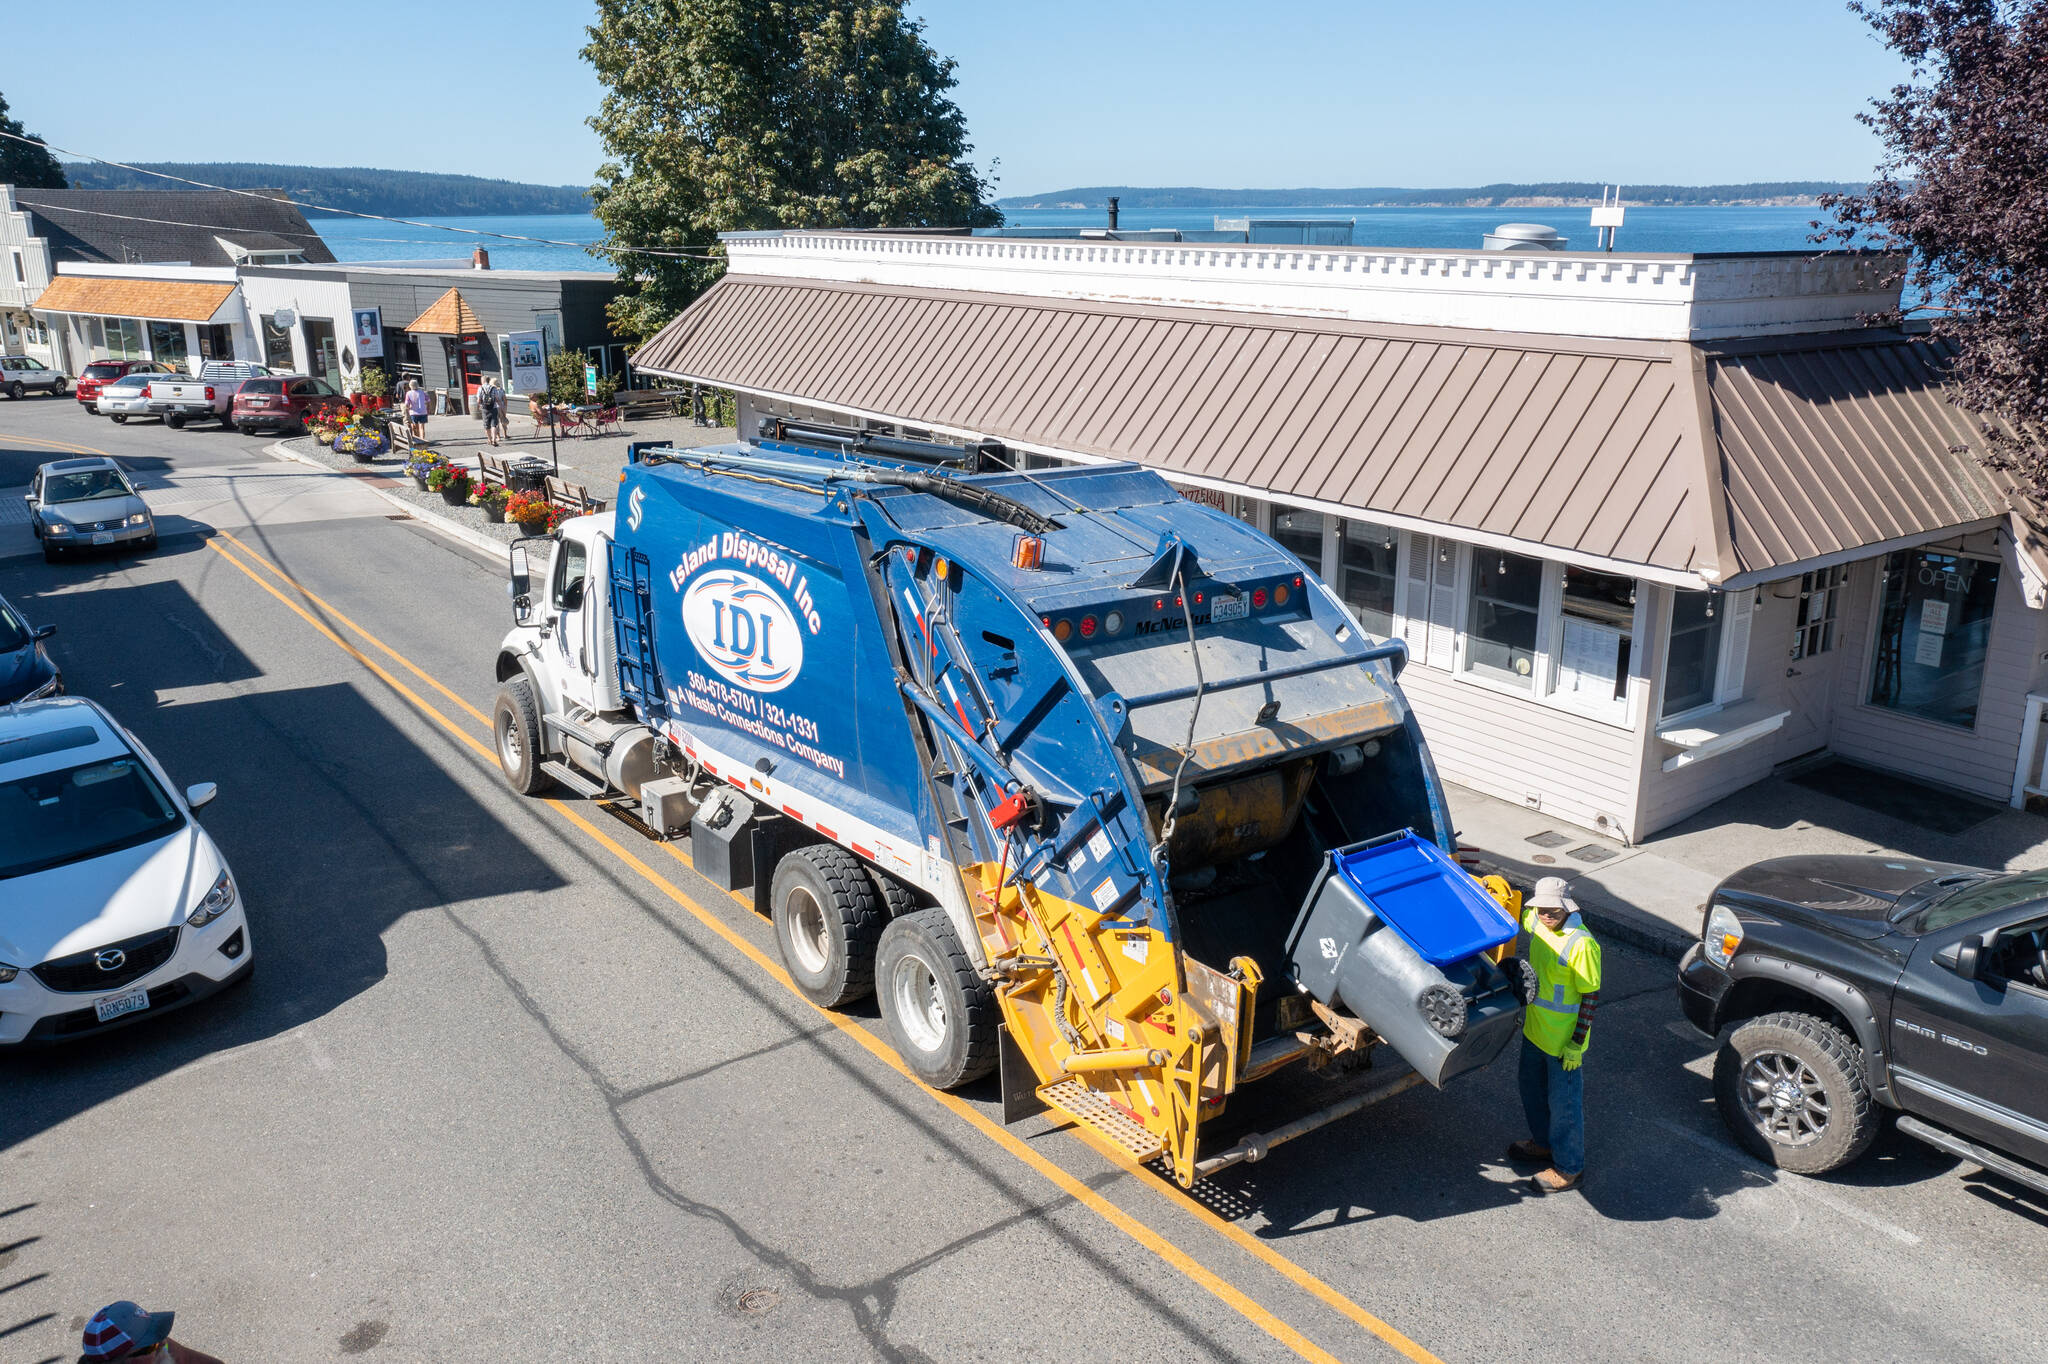 Island Disposal workers pick up the recycling in downtown Langley. Commercial customers can now receive expanded recycling services. (Photo provided)